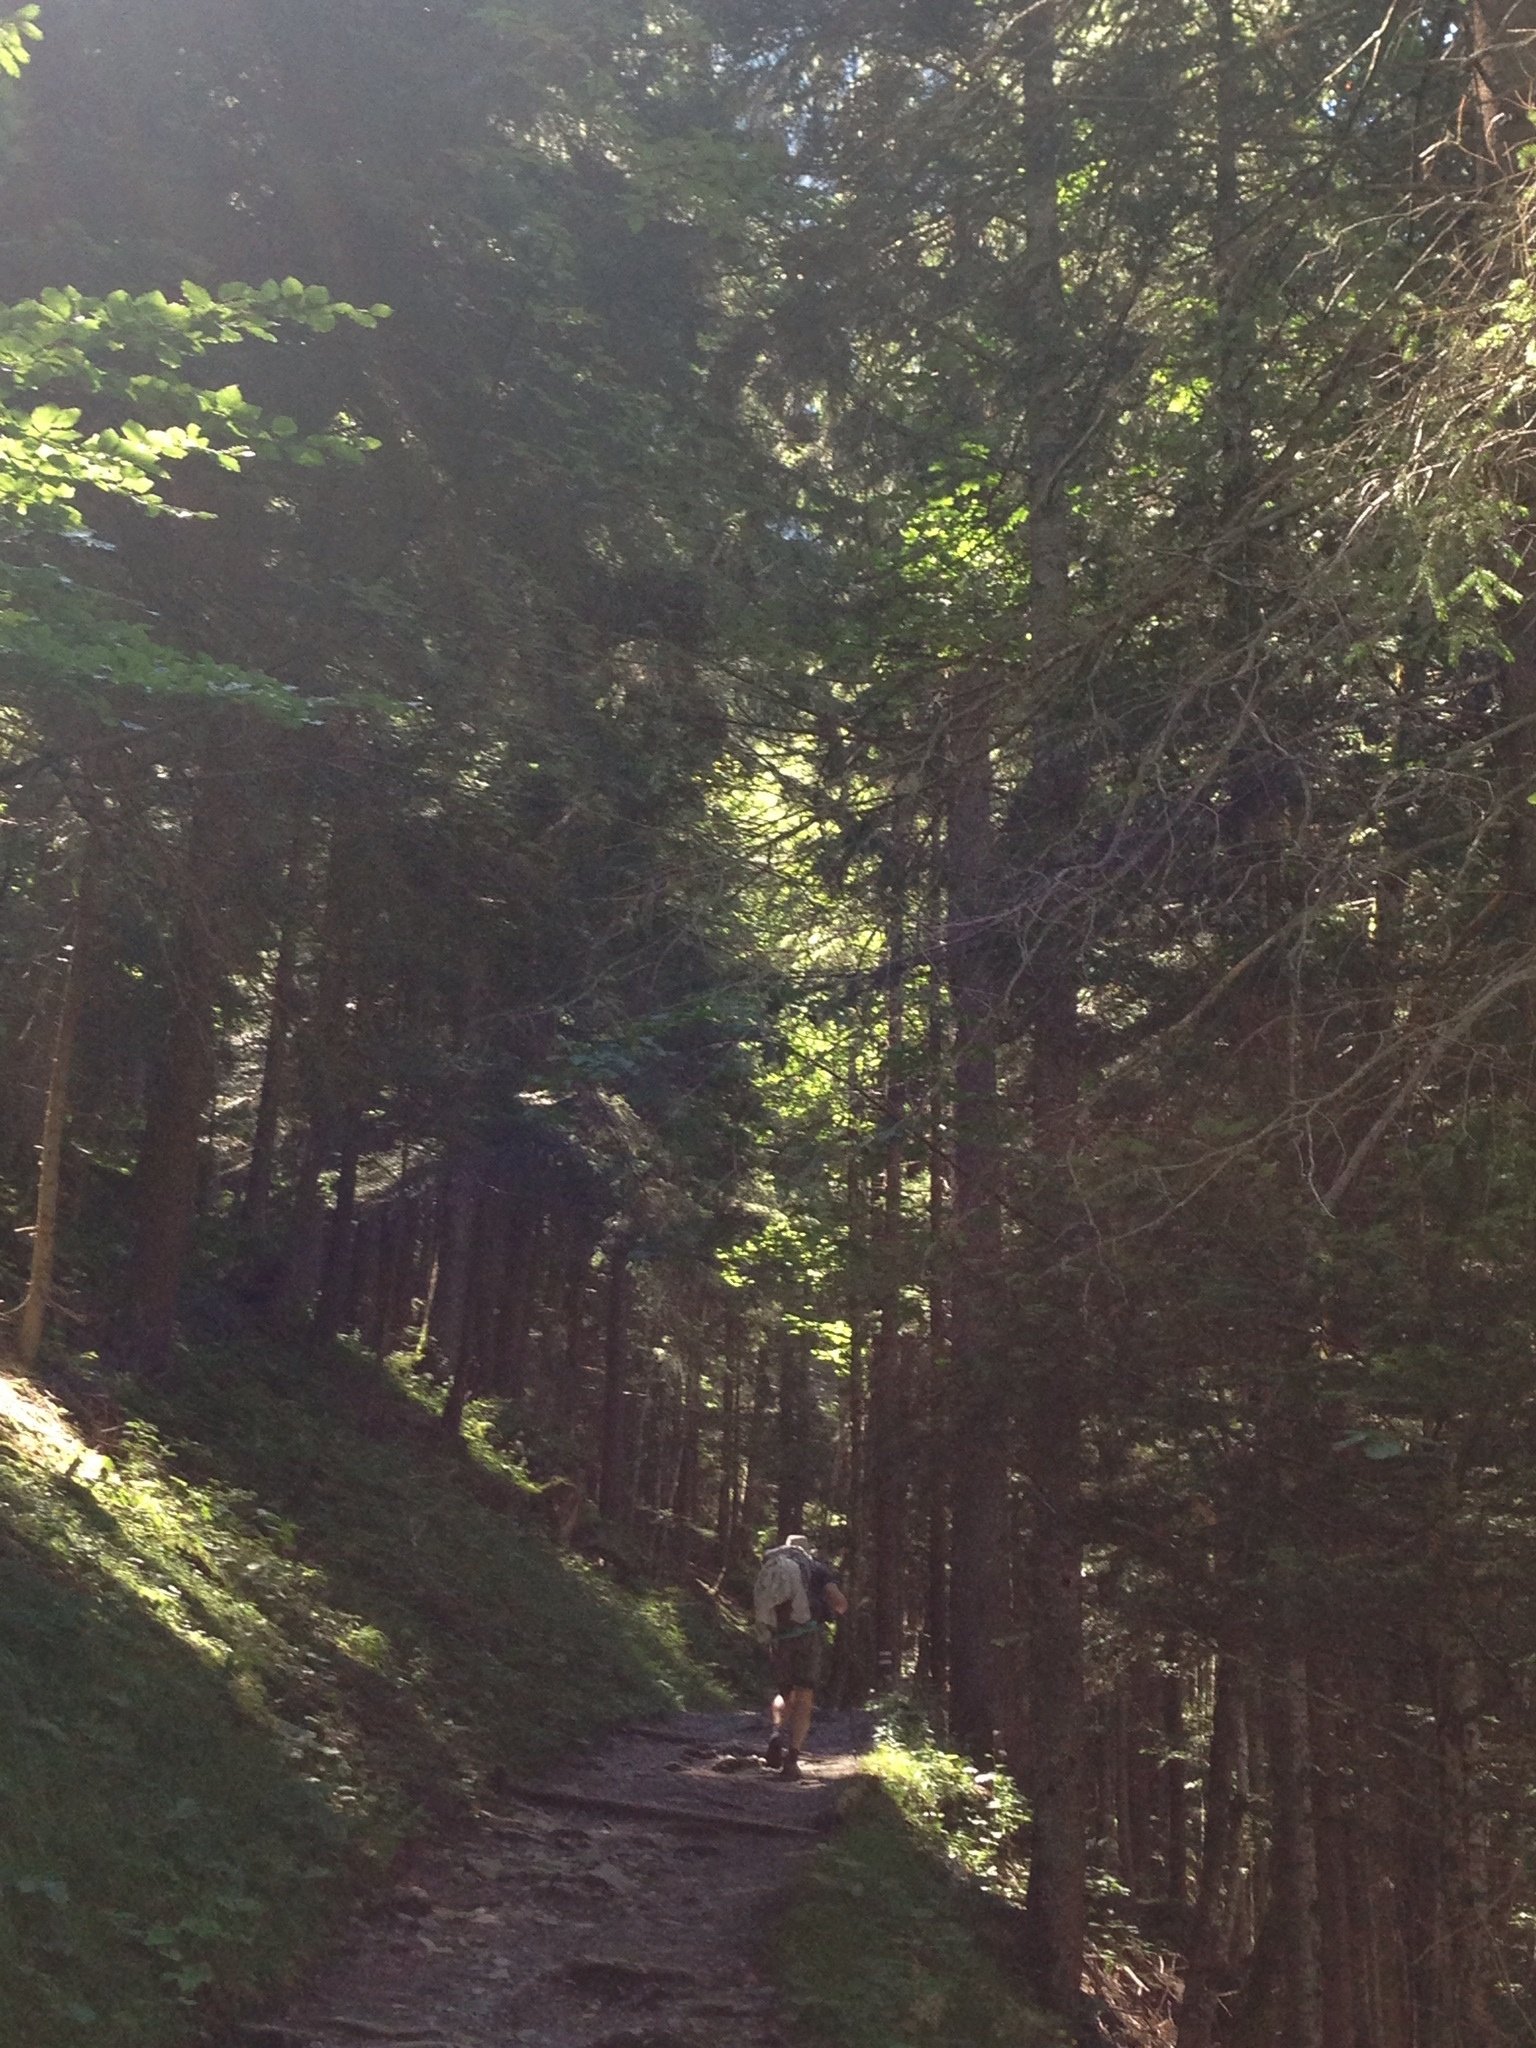 Most of our hike up to the upper Lauterbrunnen valley was through forest